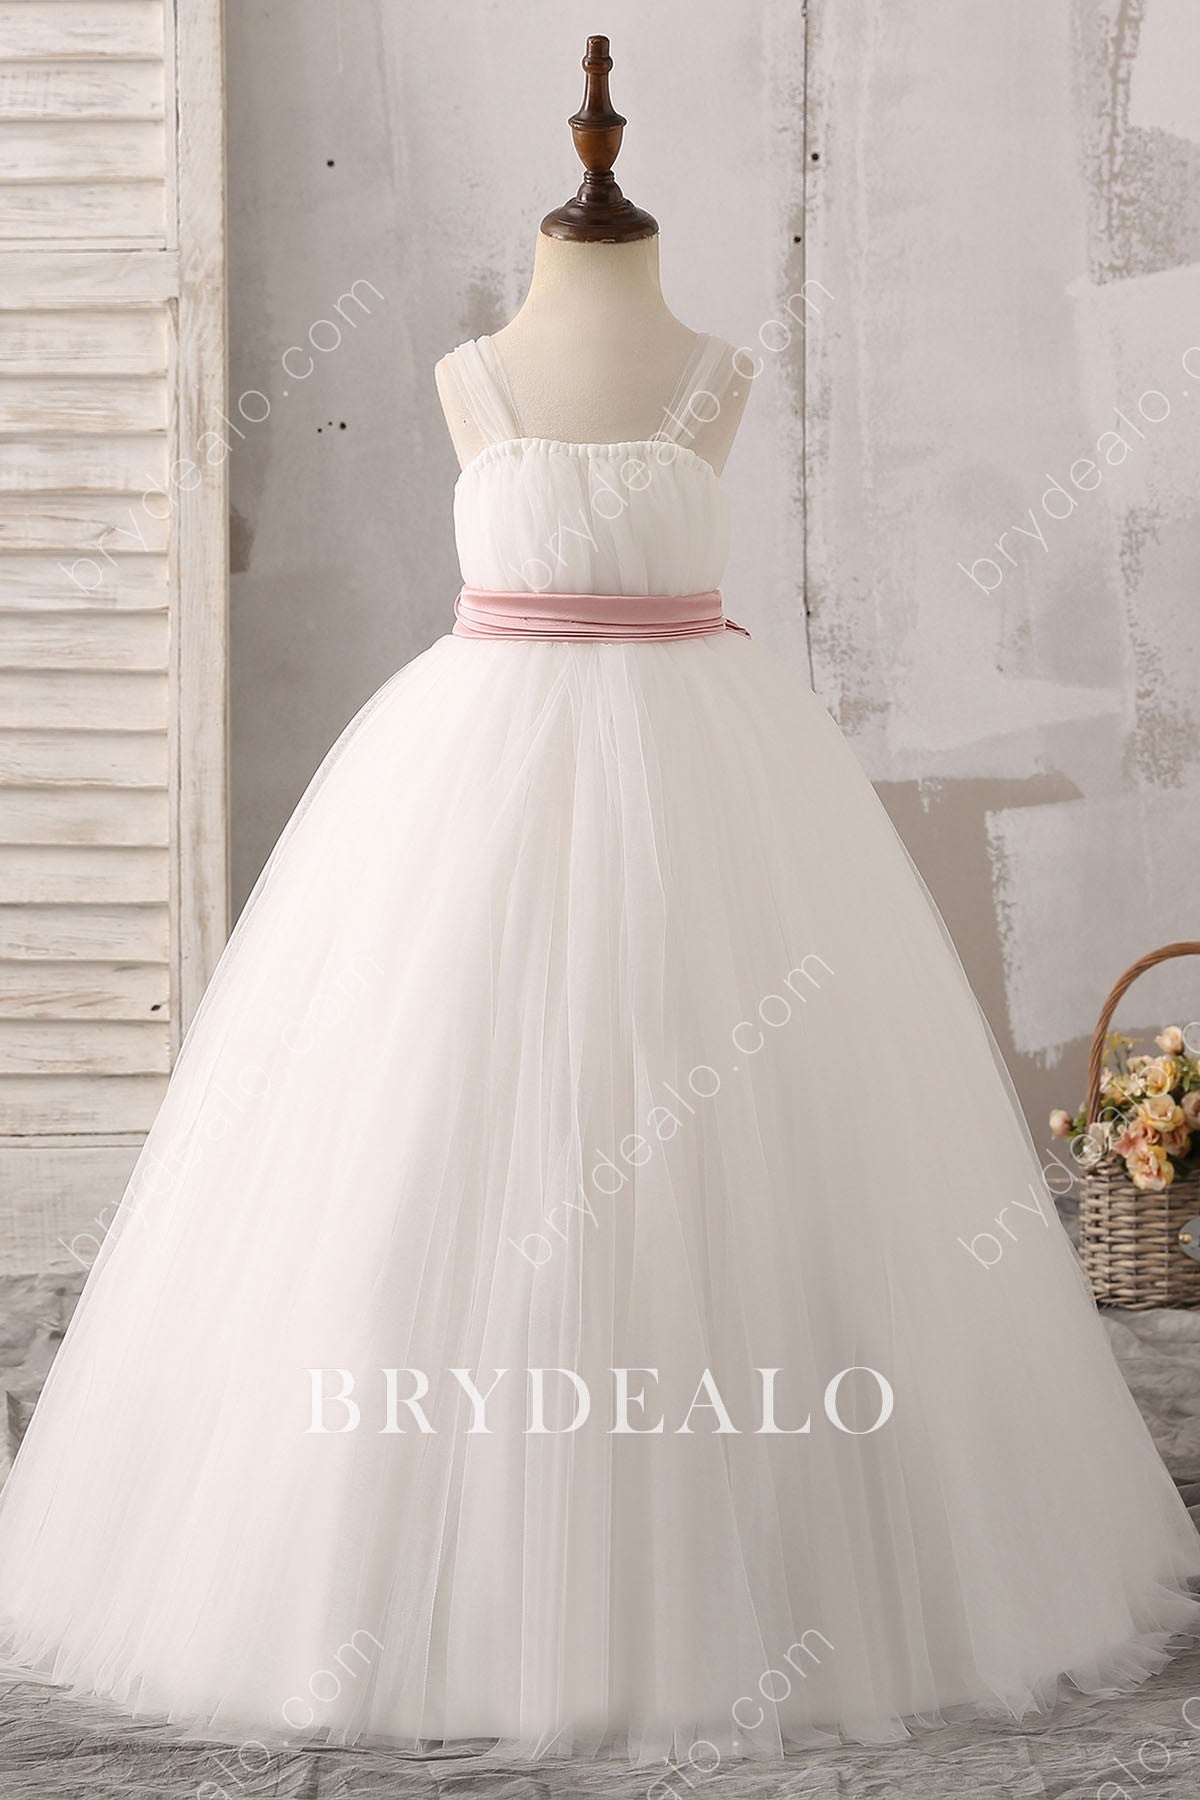 Soft Tulle Flower Girl Ball Gown with Pink Bow